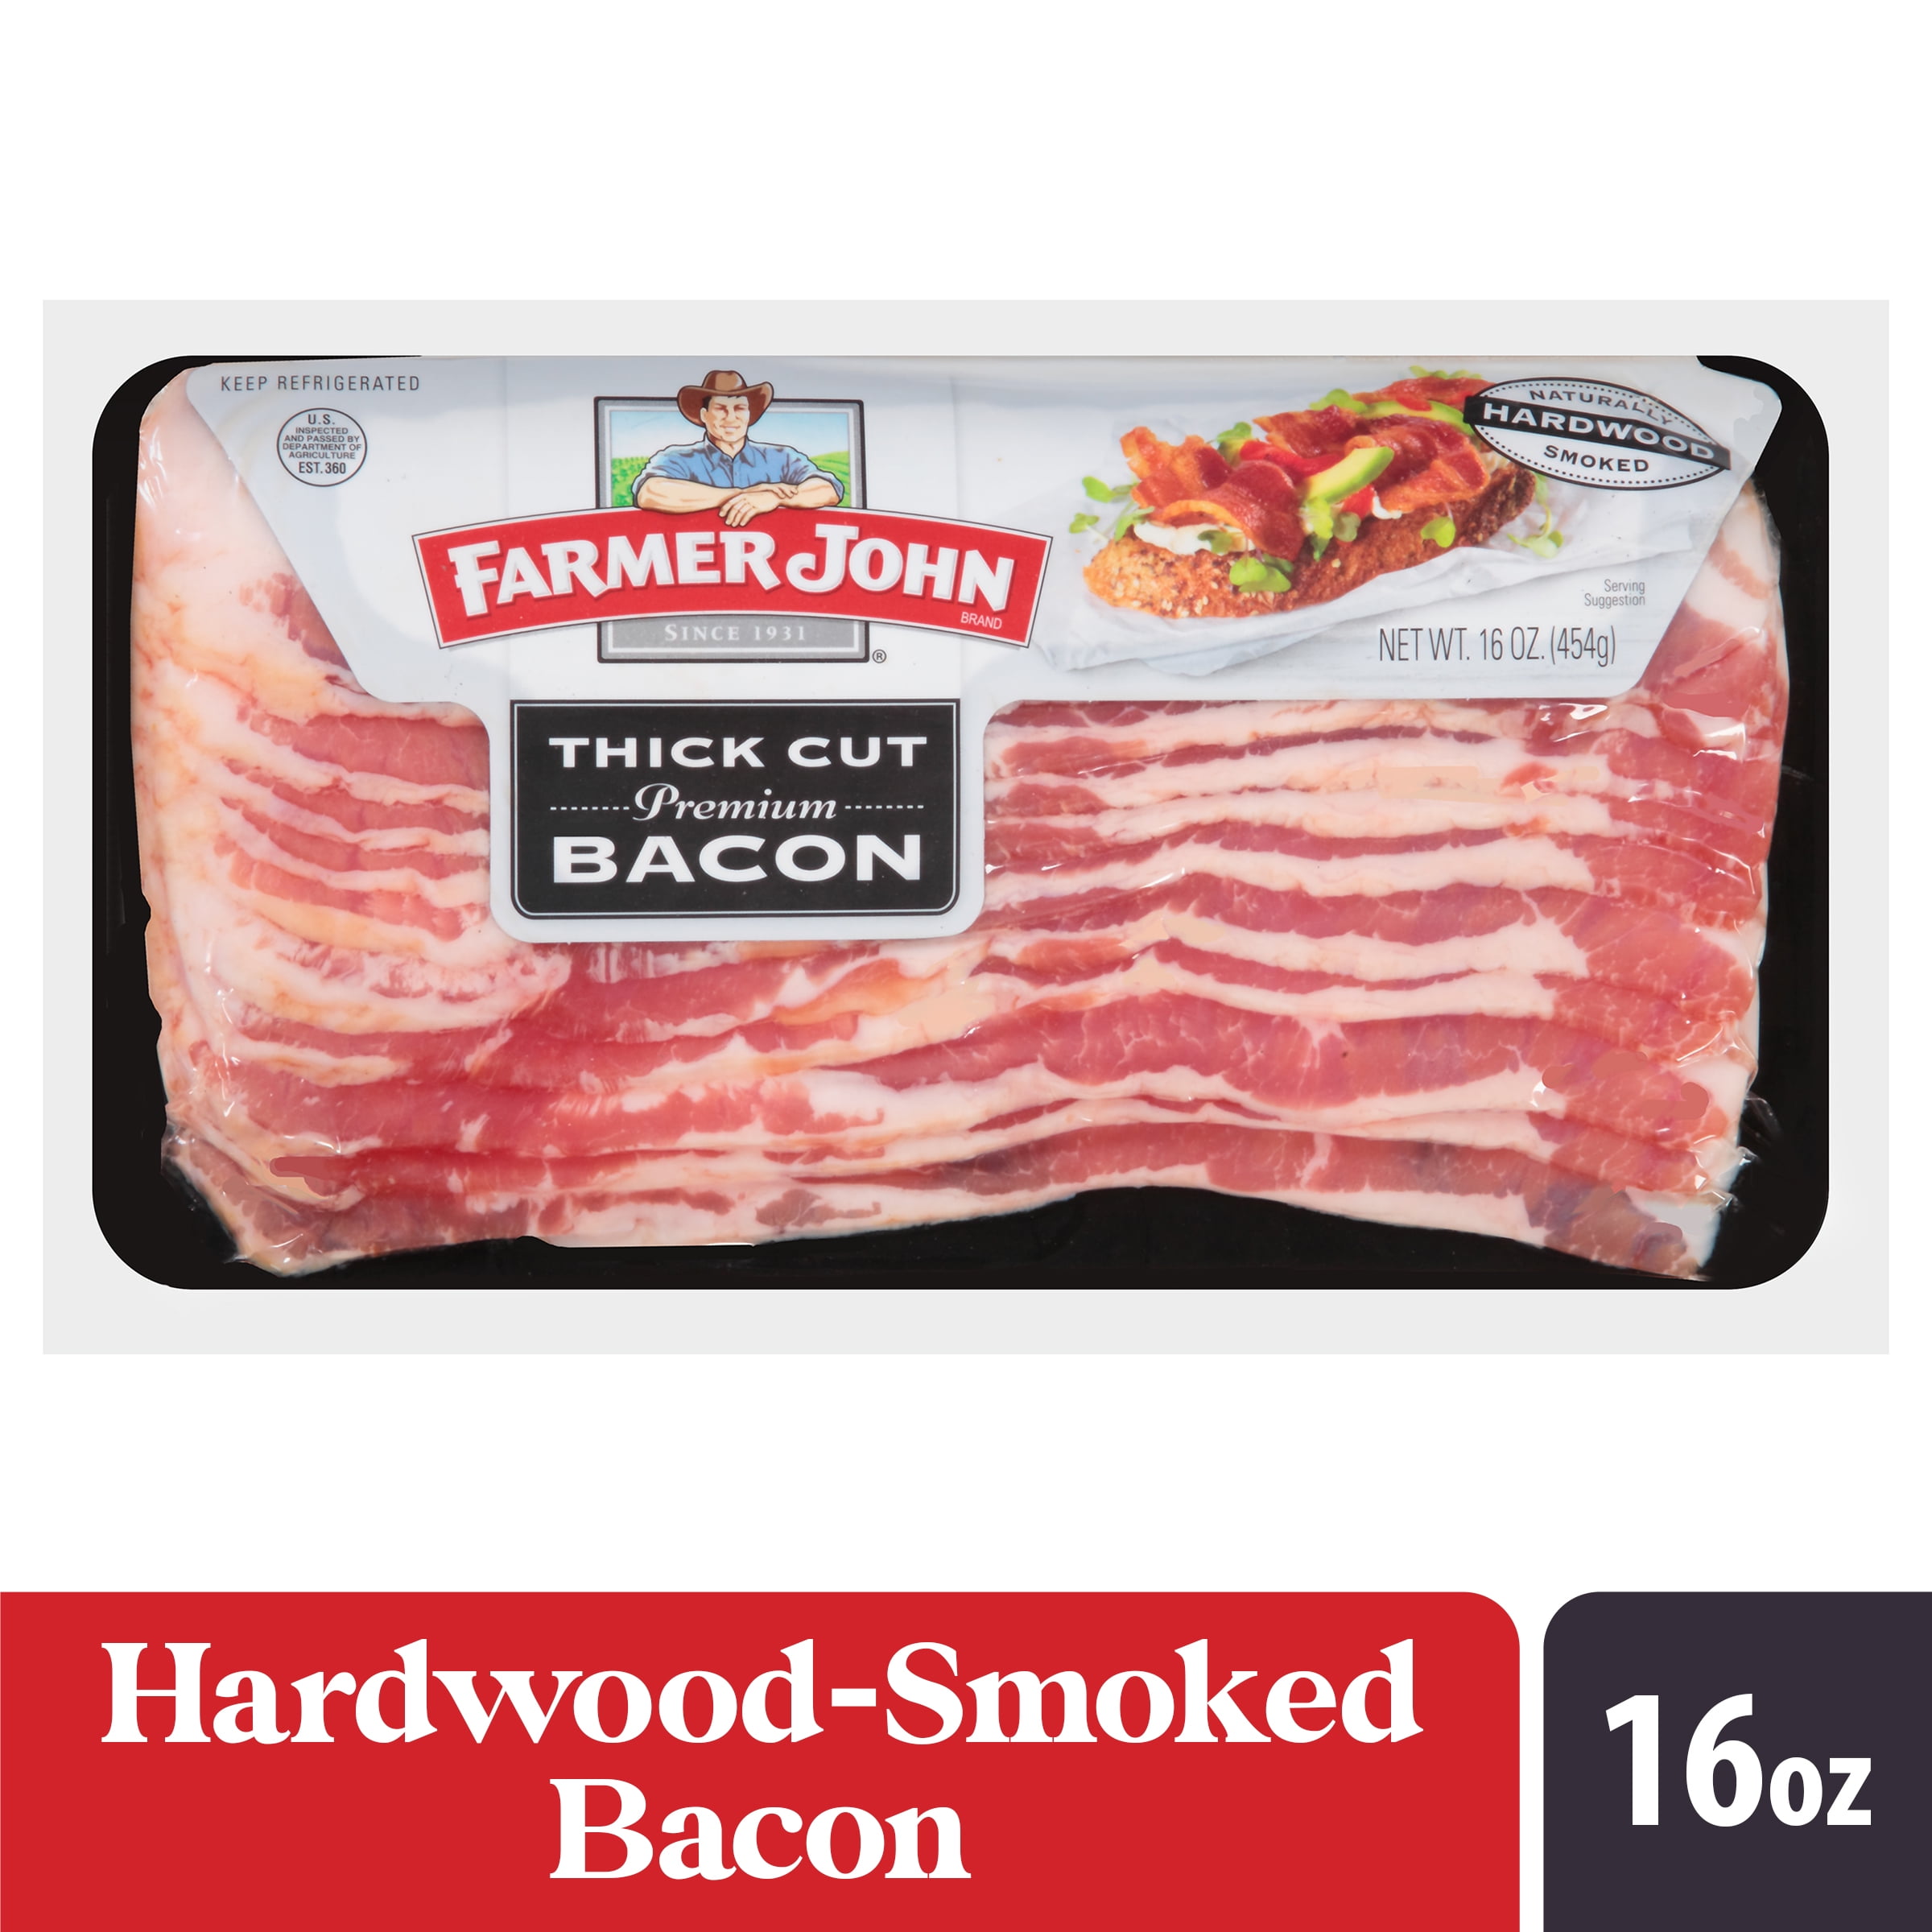 Best Bacon - Applegate, Costco Review